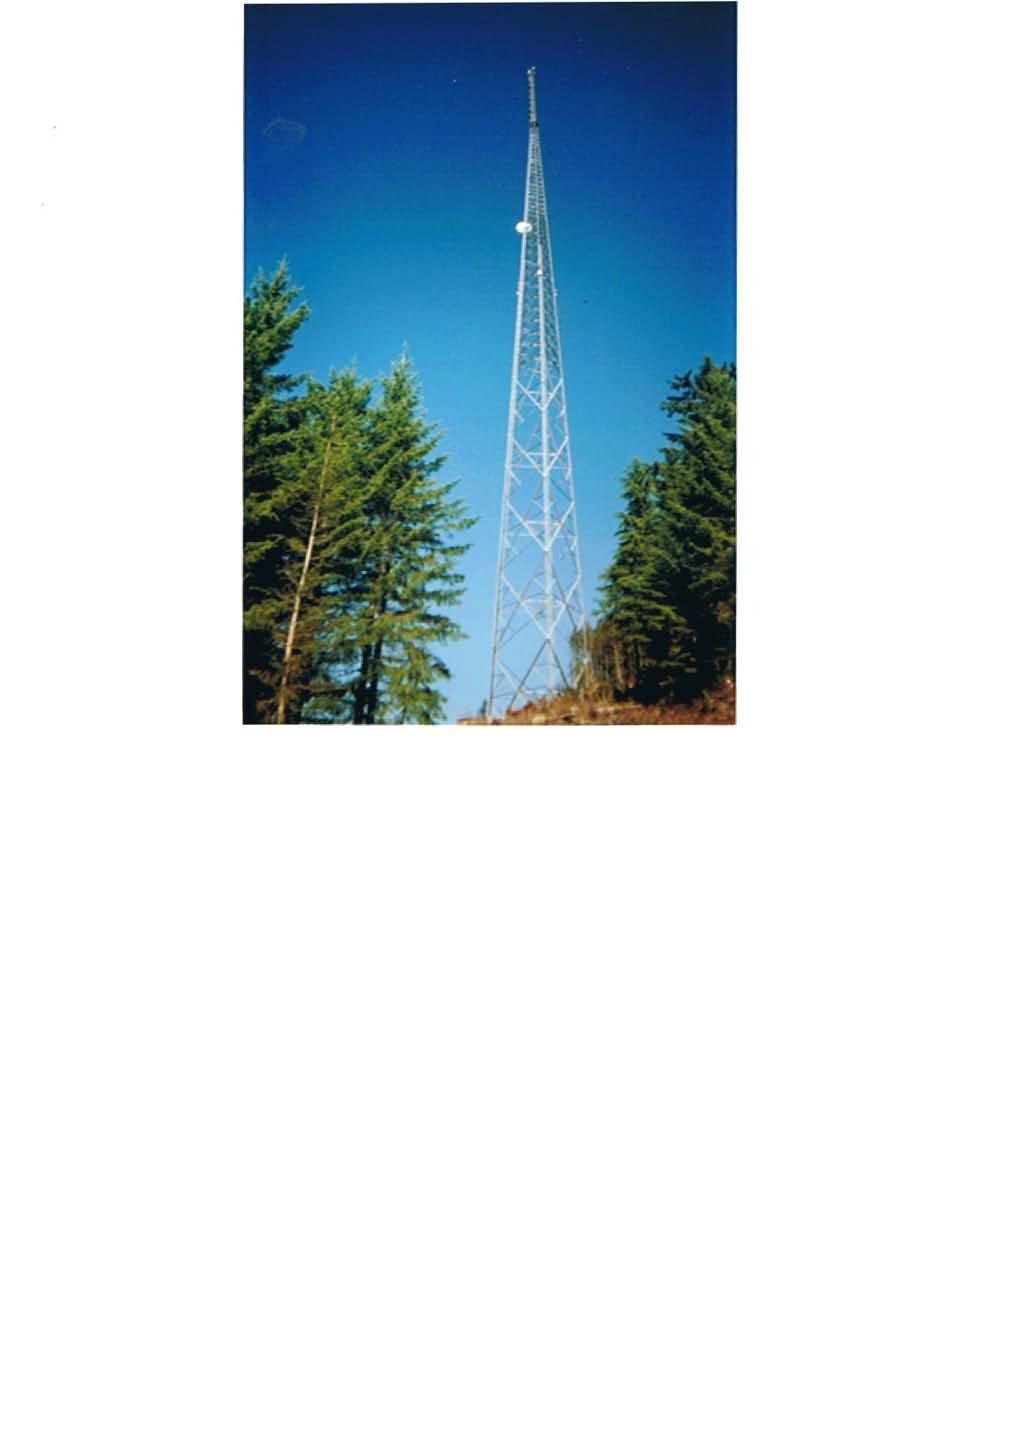 Portland Tower Portland, OR: This tower is a 550 ft Self Supporting tower built on State of